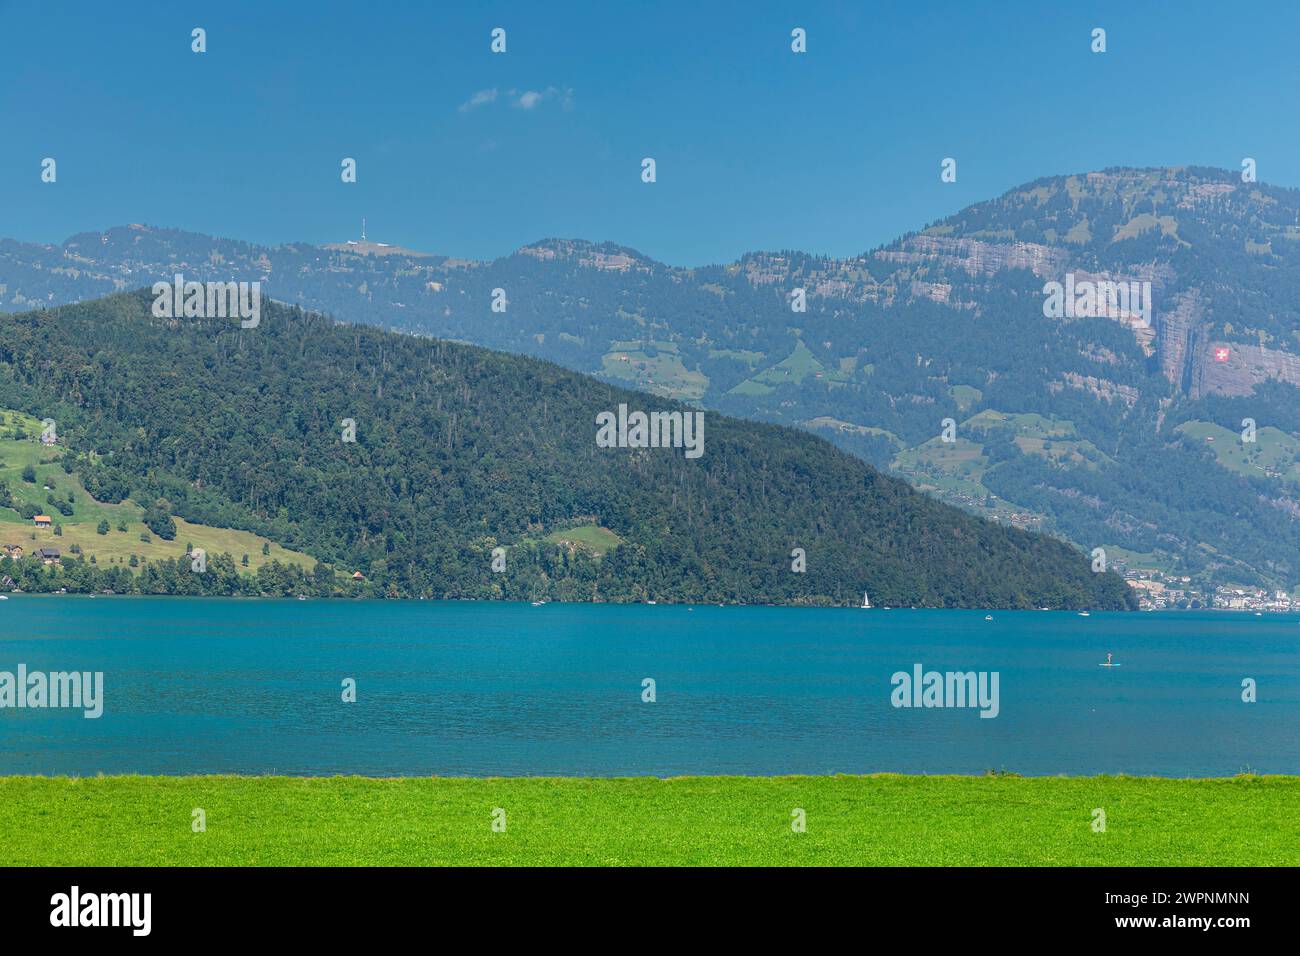 Lake Lucerne near Beckenried with a view of the Rigi, Canton Niewalden, Switzerland Stock Photo